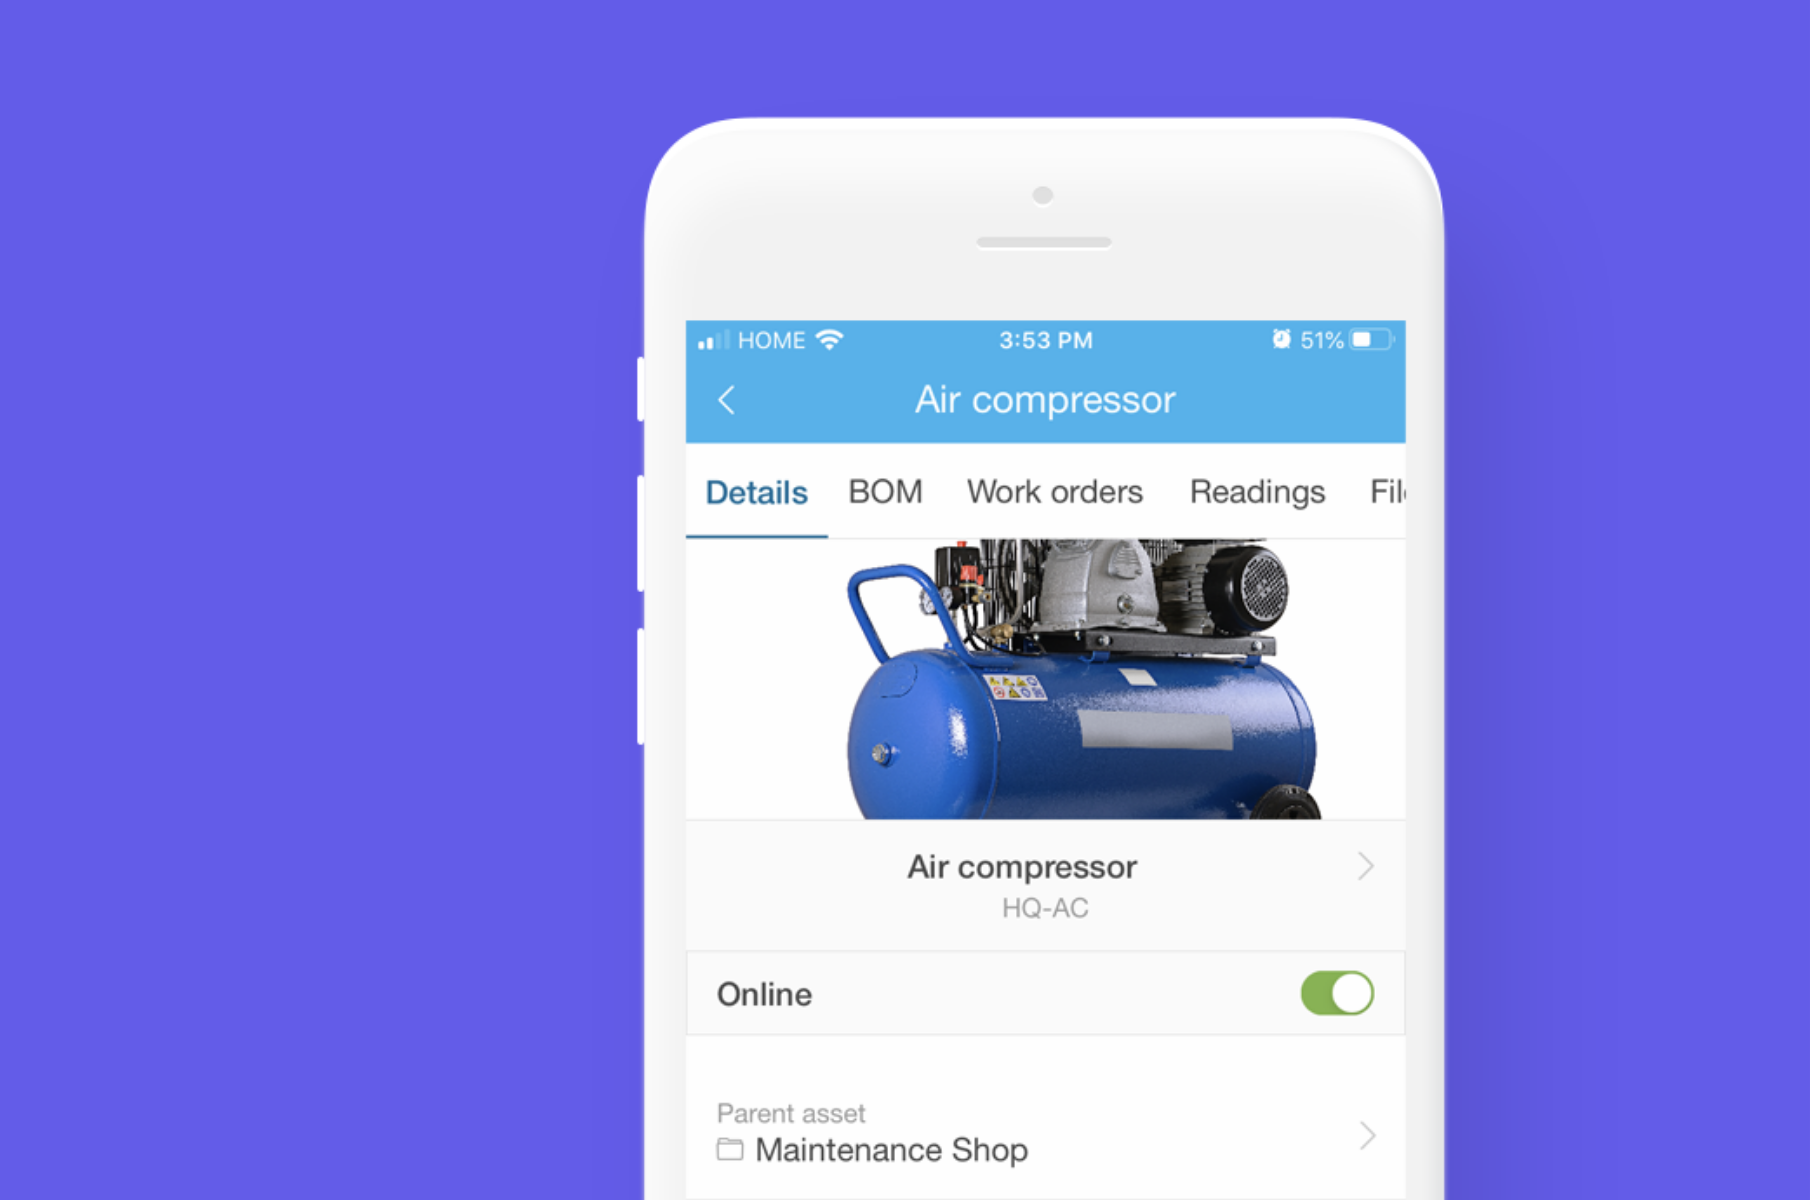 Access parts and asset info on the go